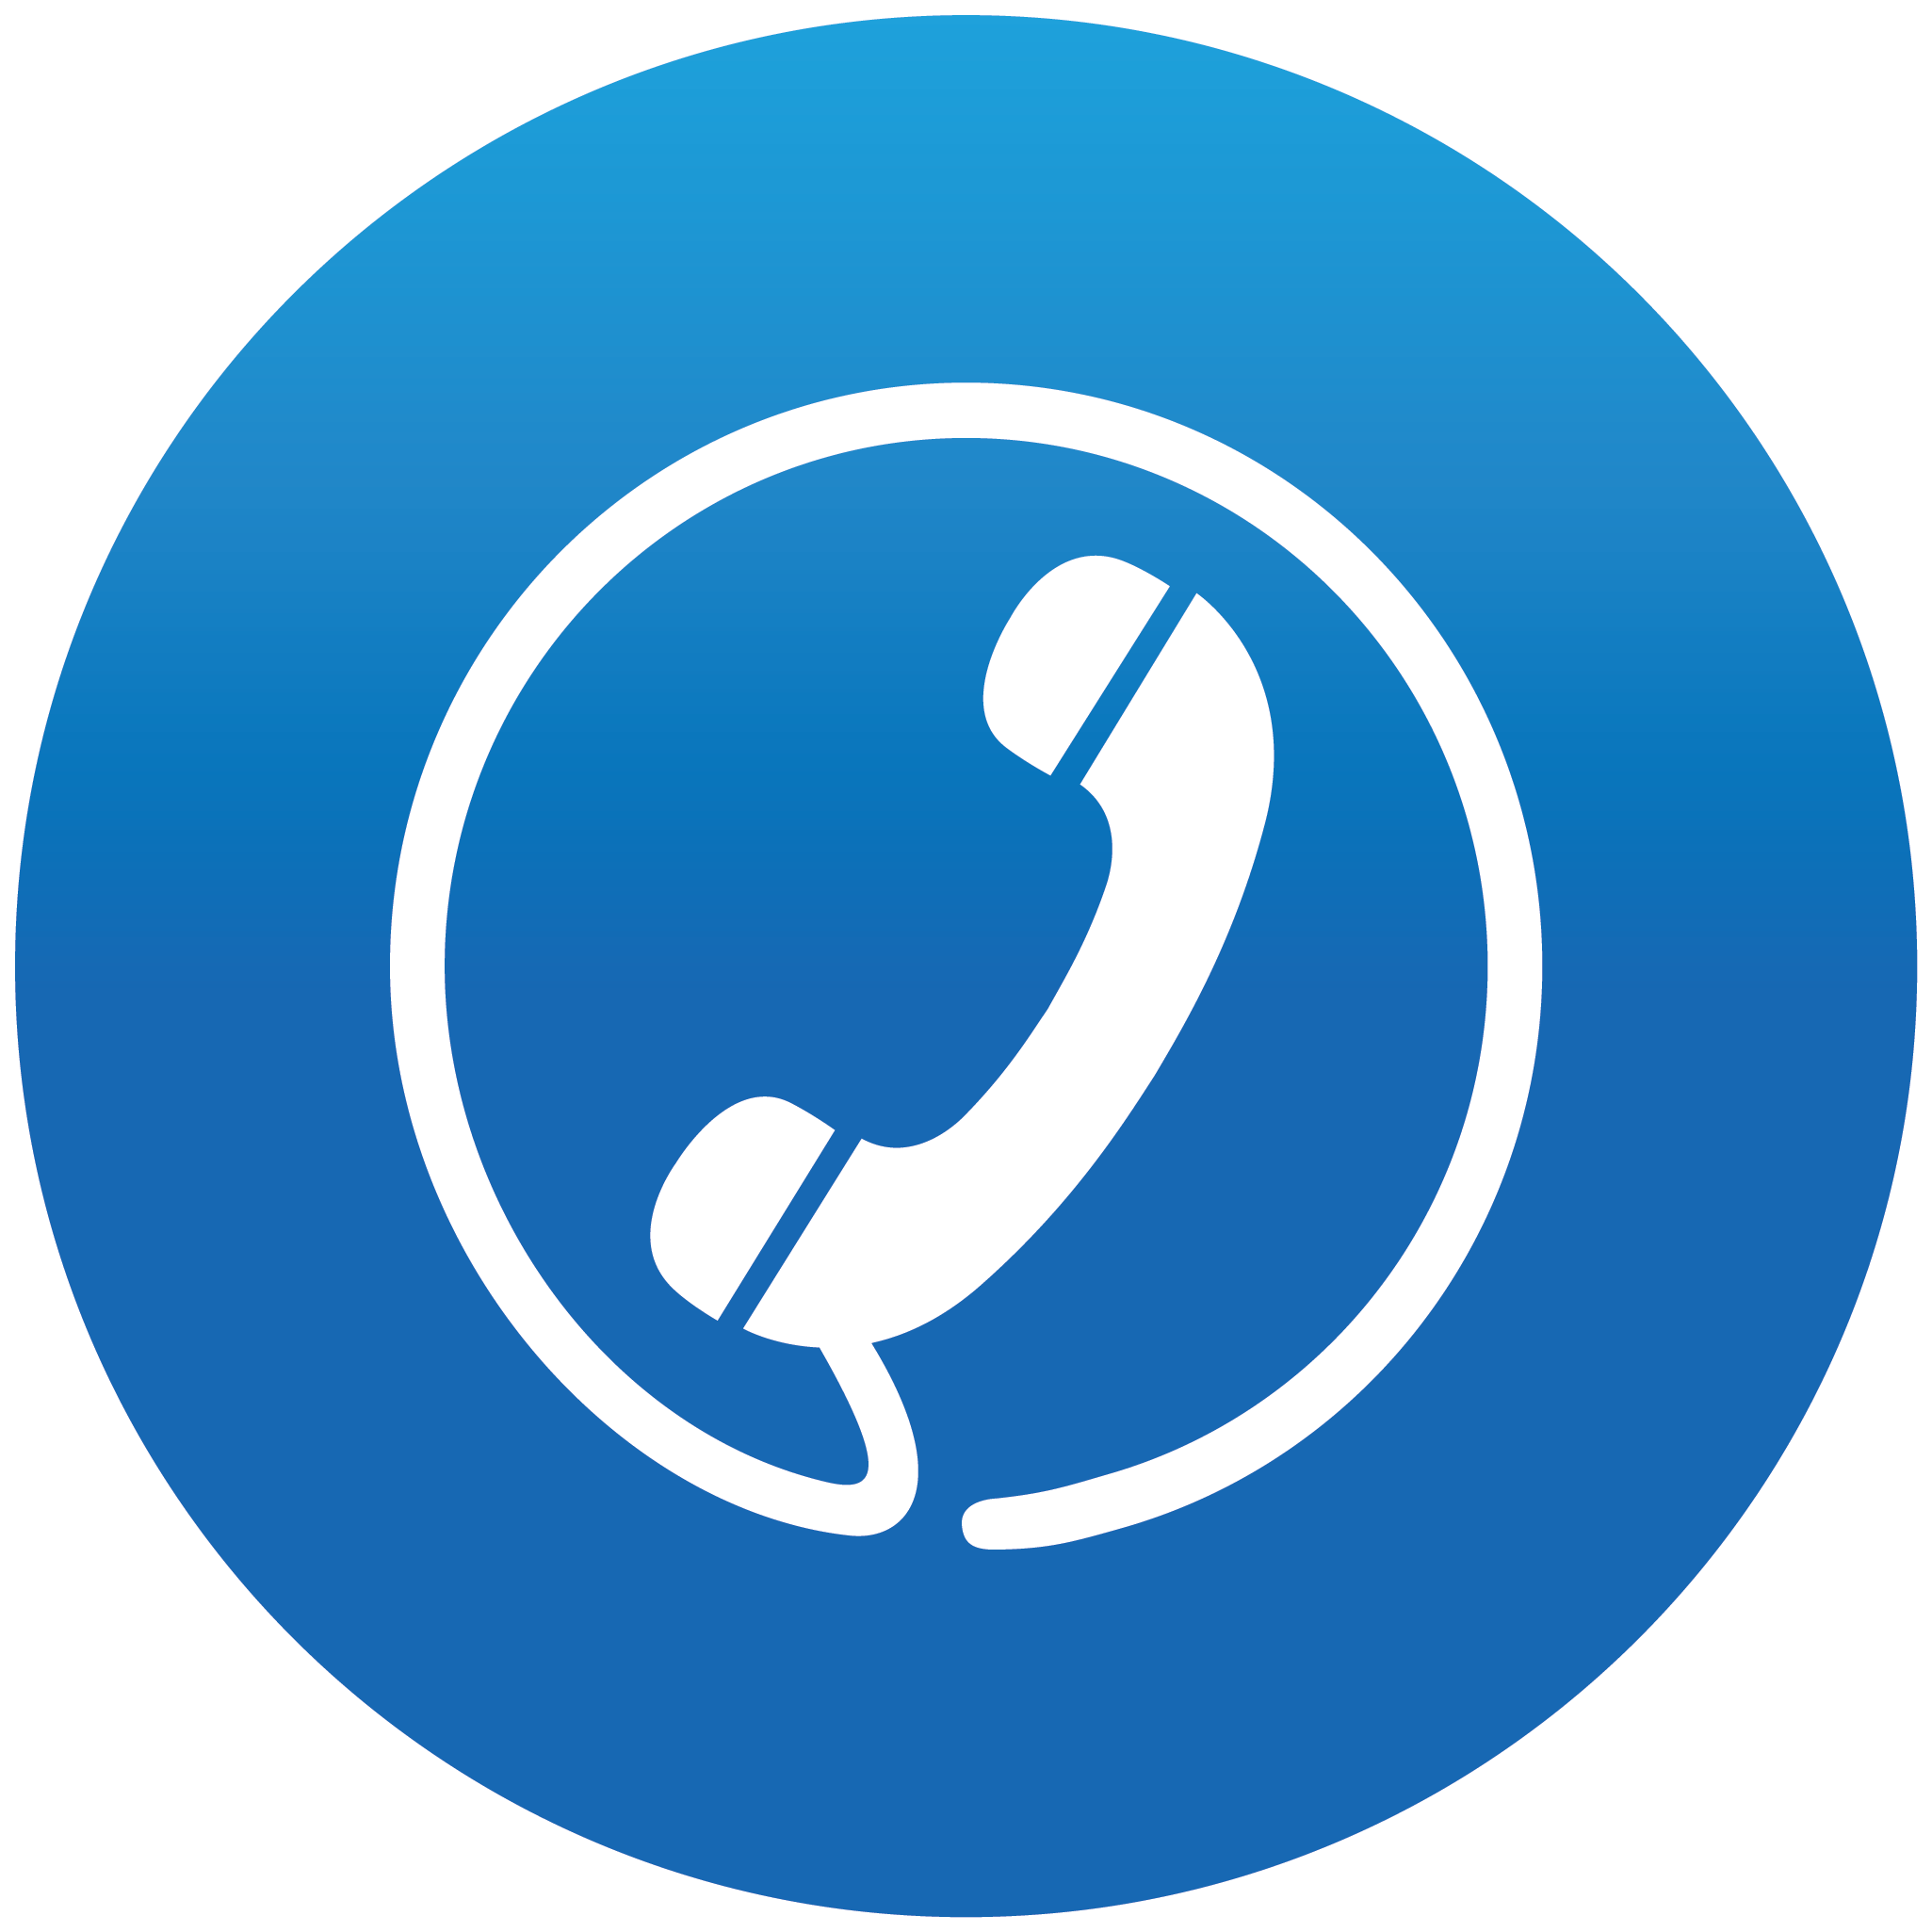 phone icon png free download